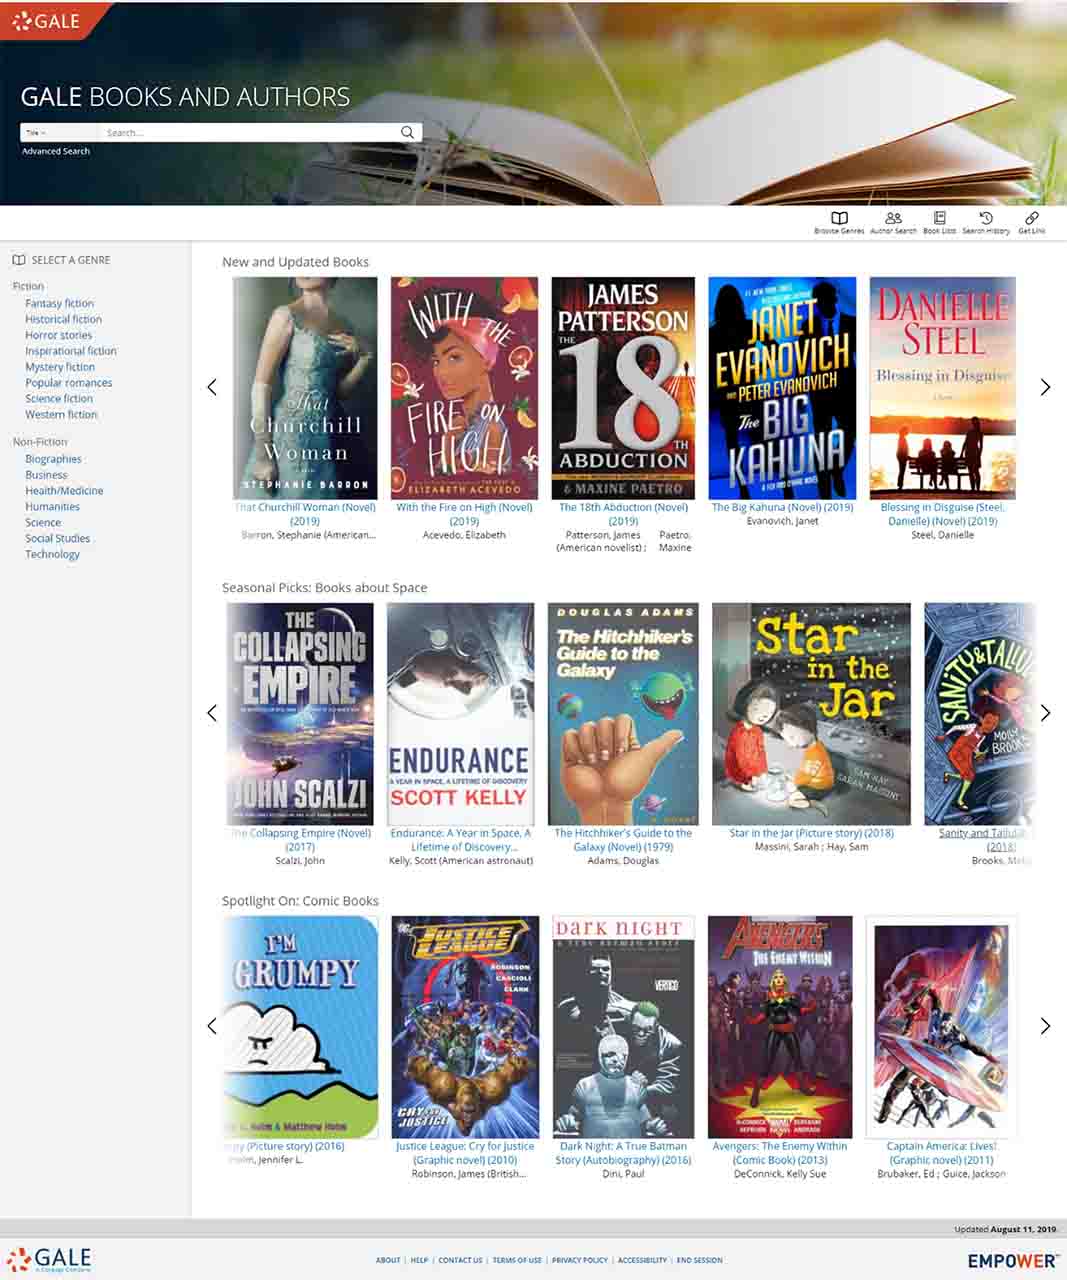 Gale Books and Authors Home Page